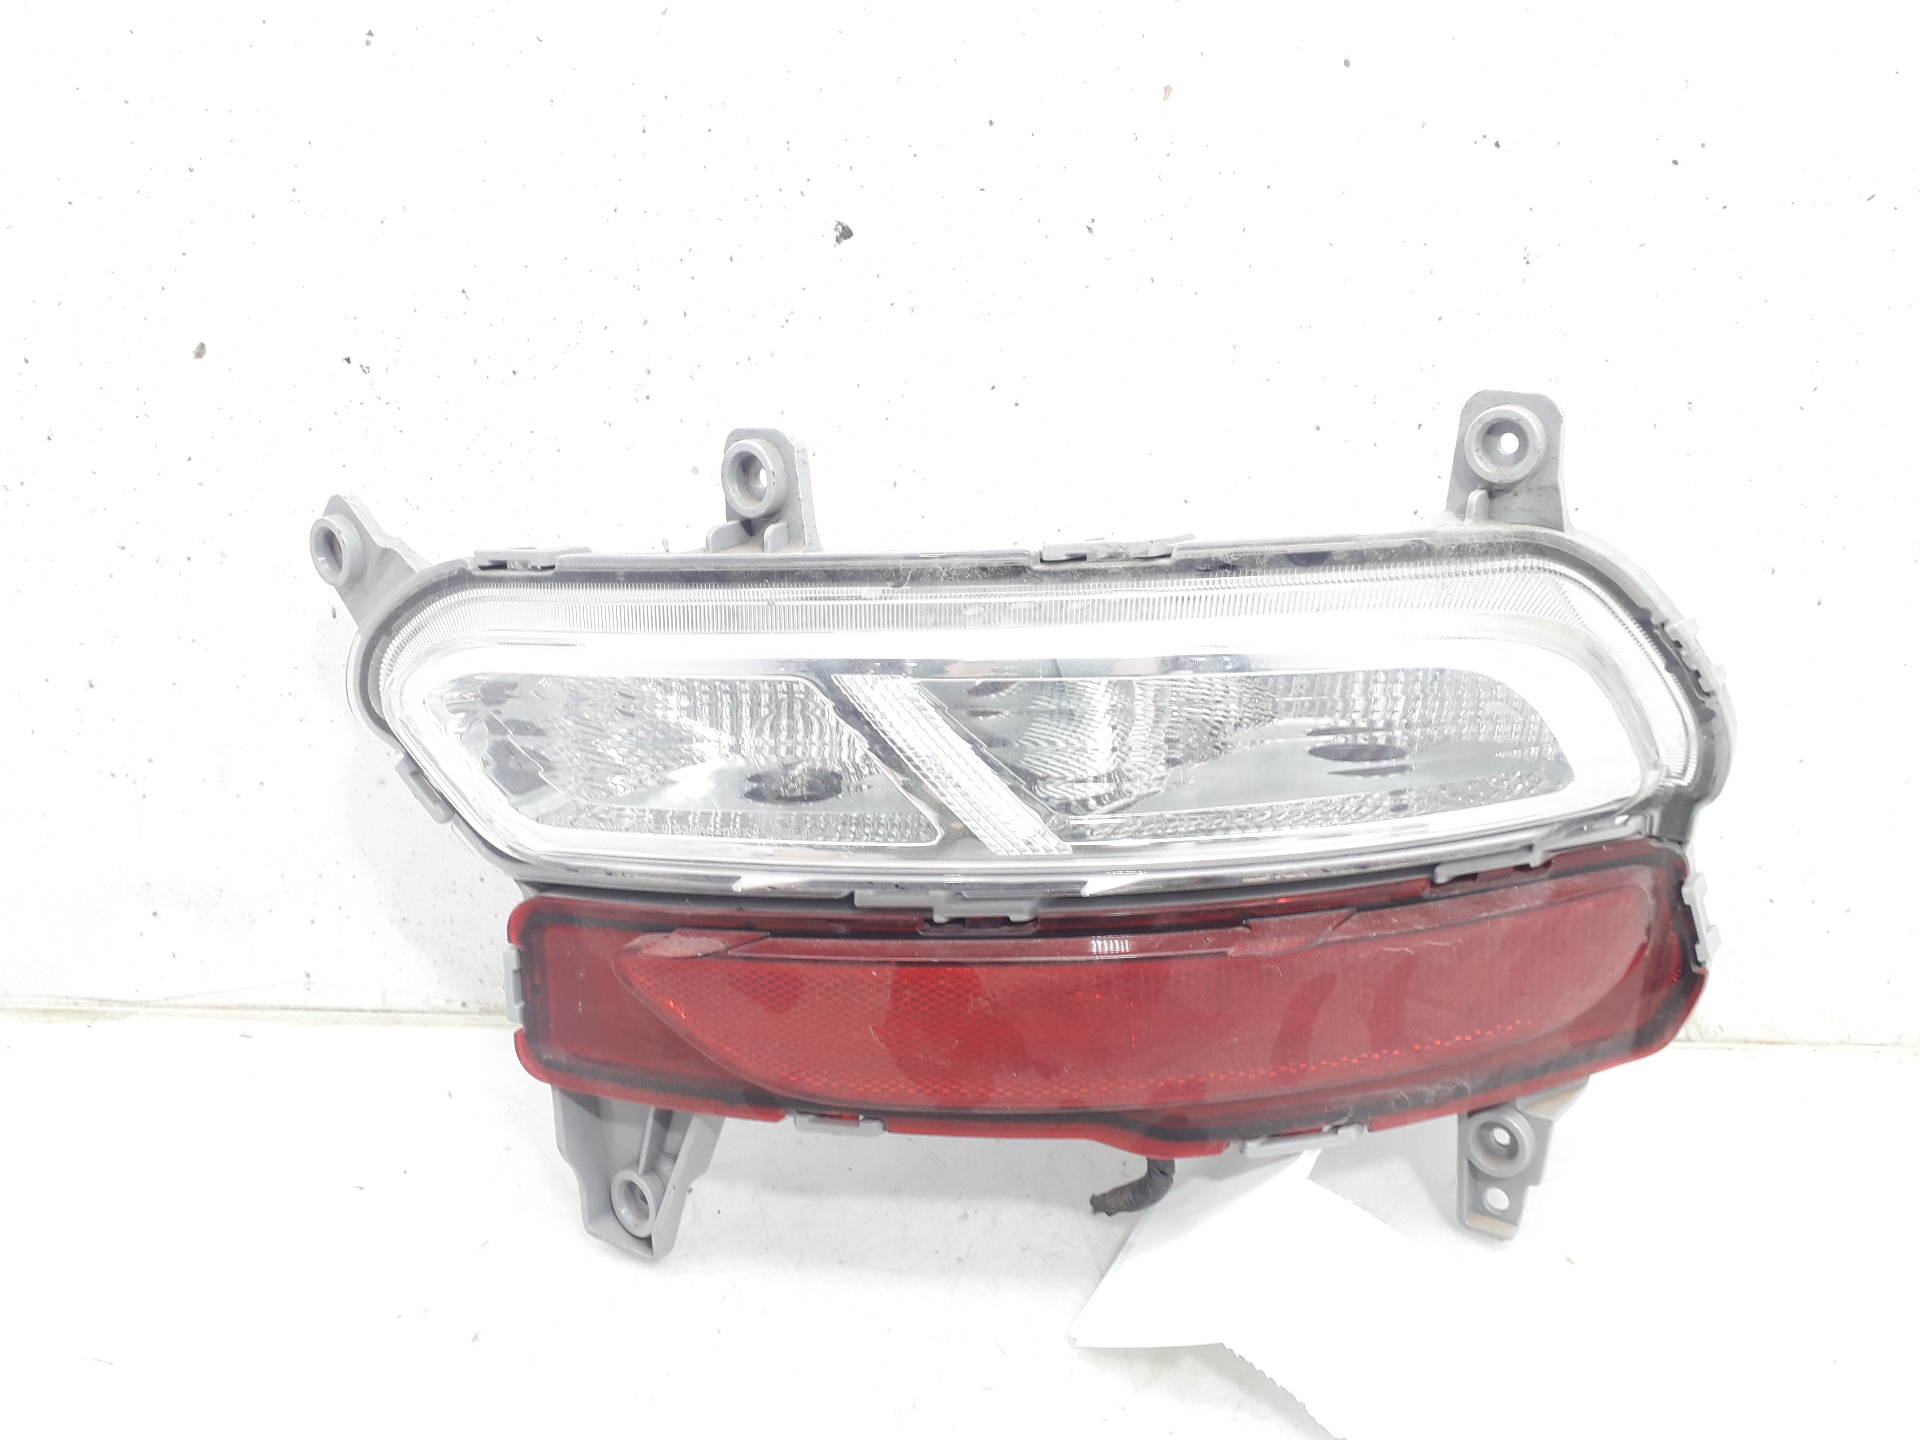 KIA Sportage 3 generation (2010-2015) Other parts of the rear bumper 92406D9710 24983086